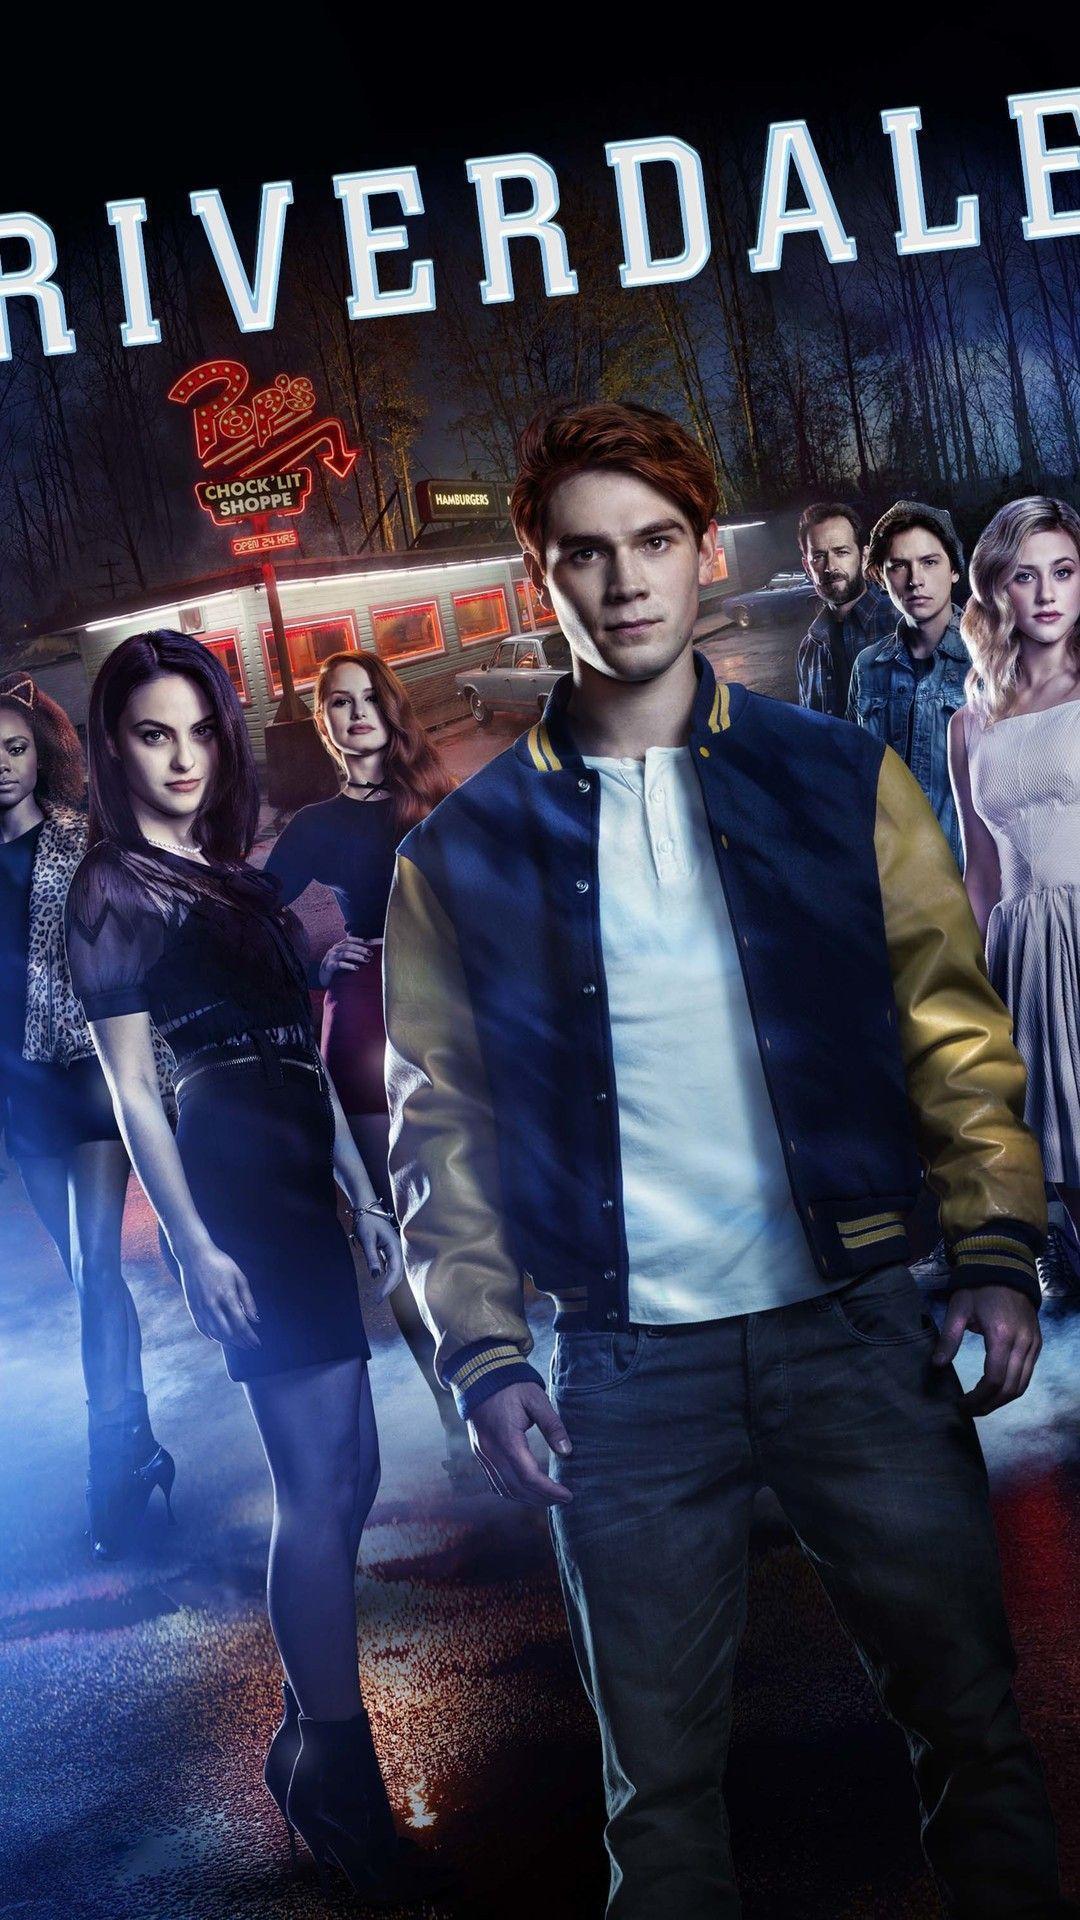 Riverdale Season 5: Release Date, Plot And Other Updates